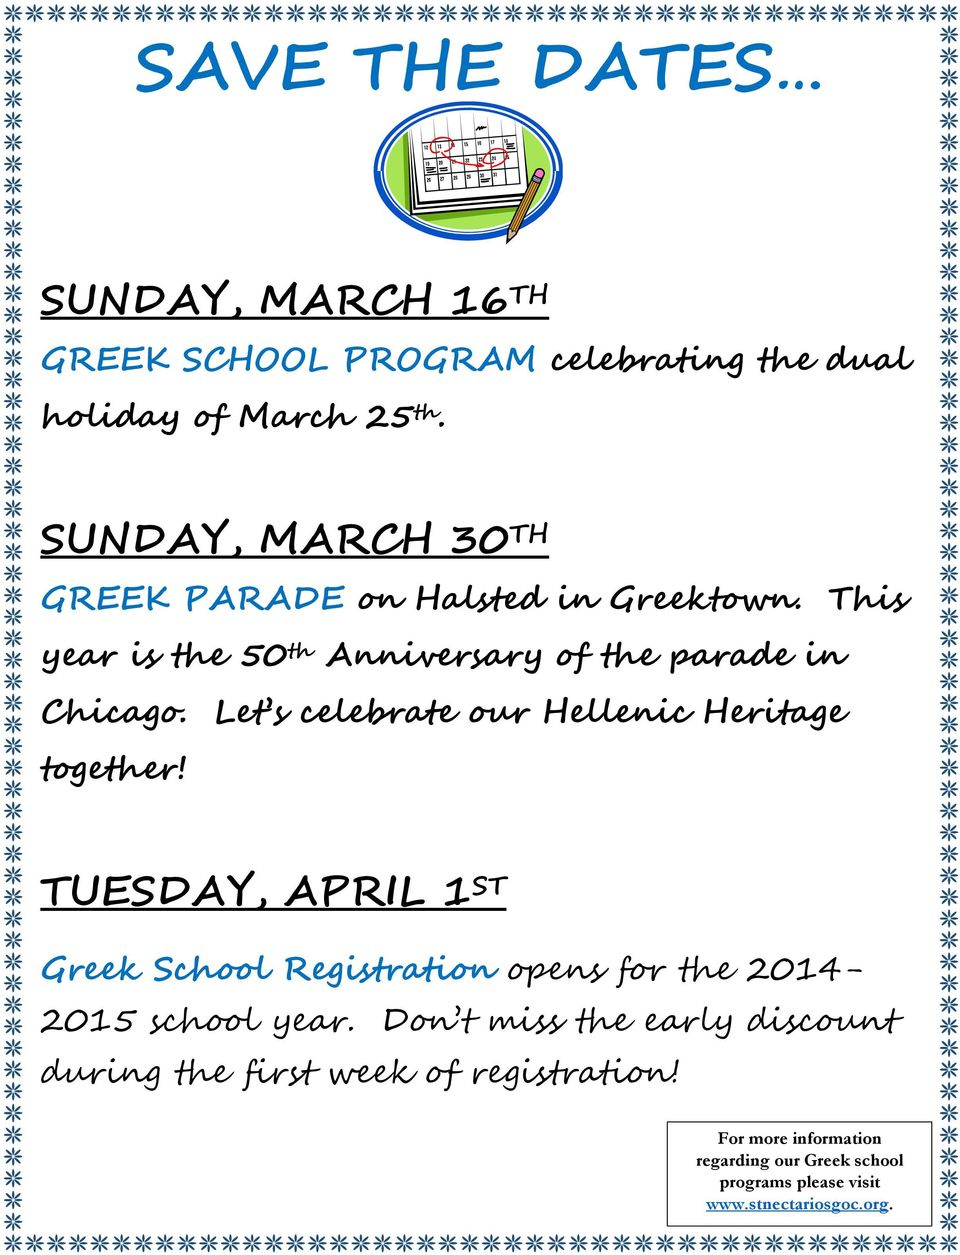 Let s celebrate our Hellenic Heritage together!